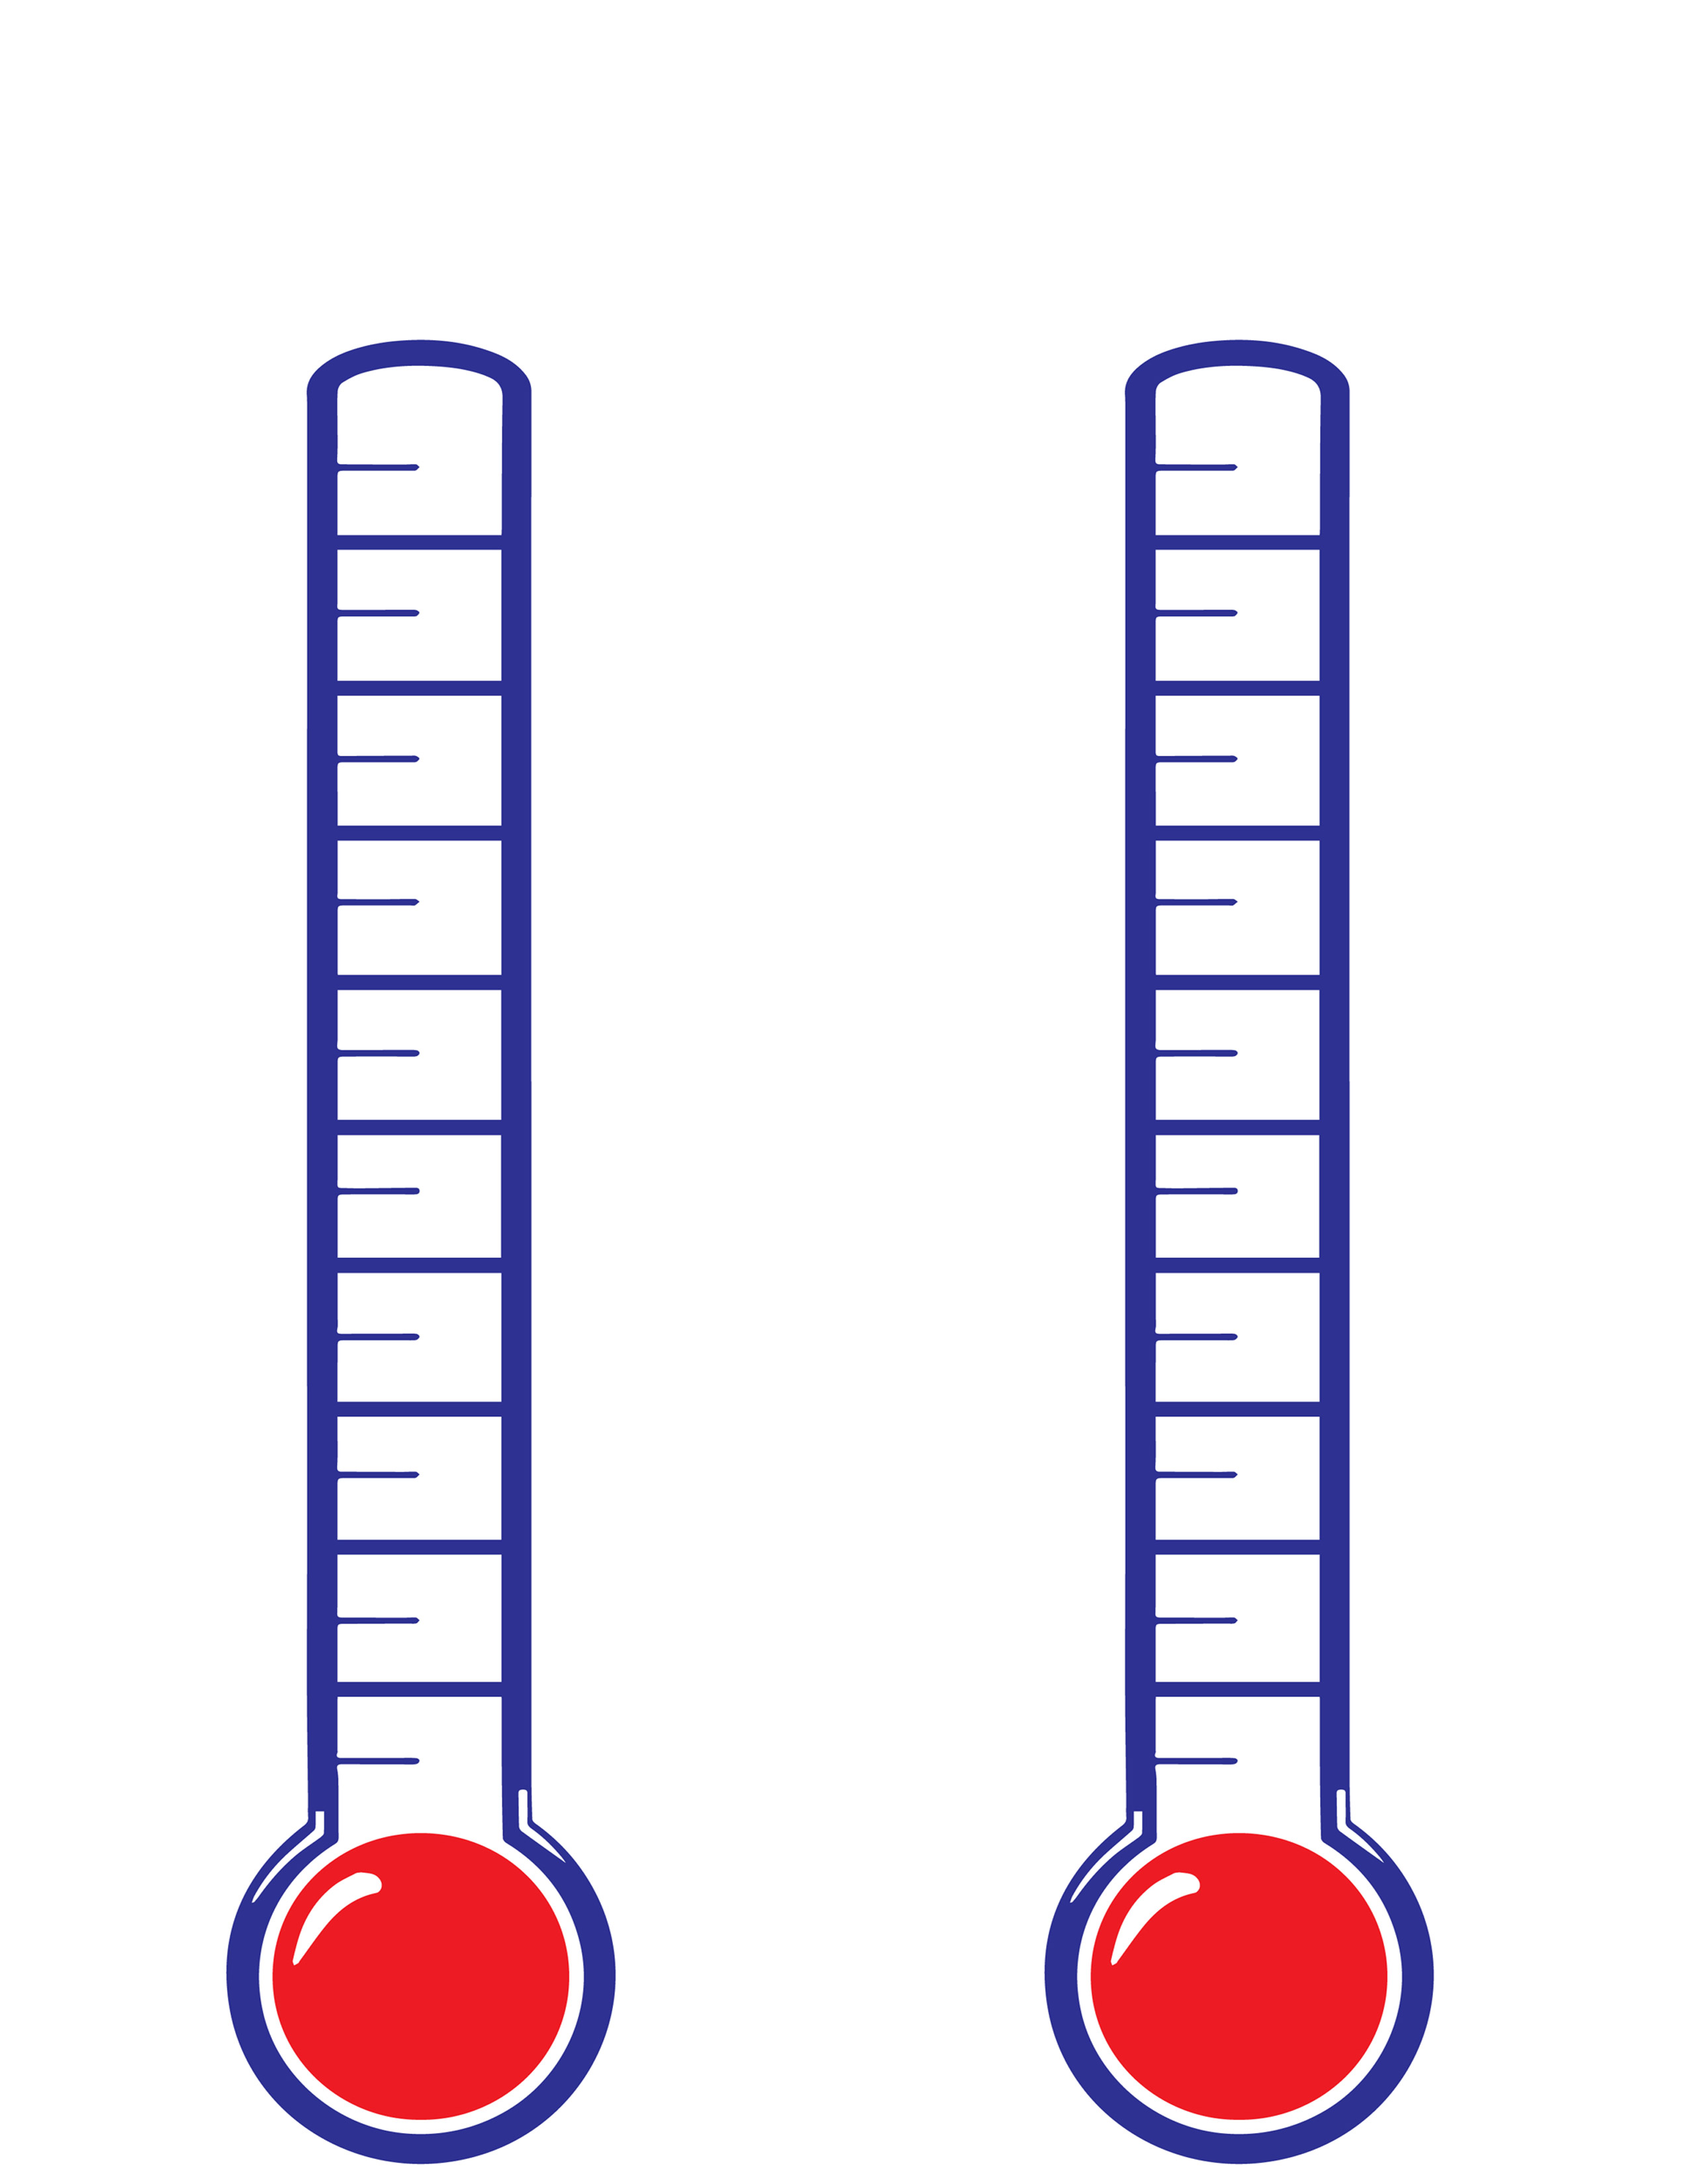 Thermometer Goal Chart Generator